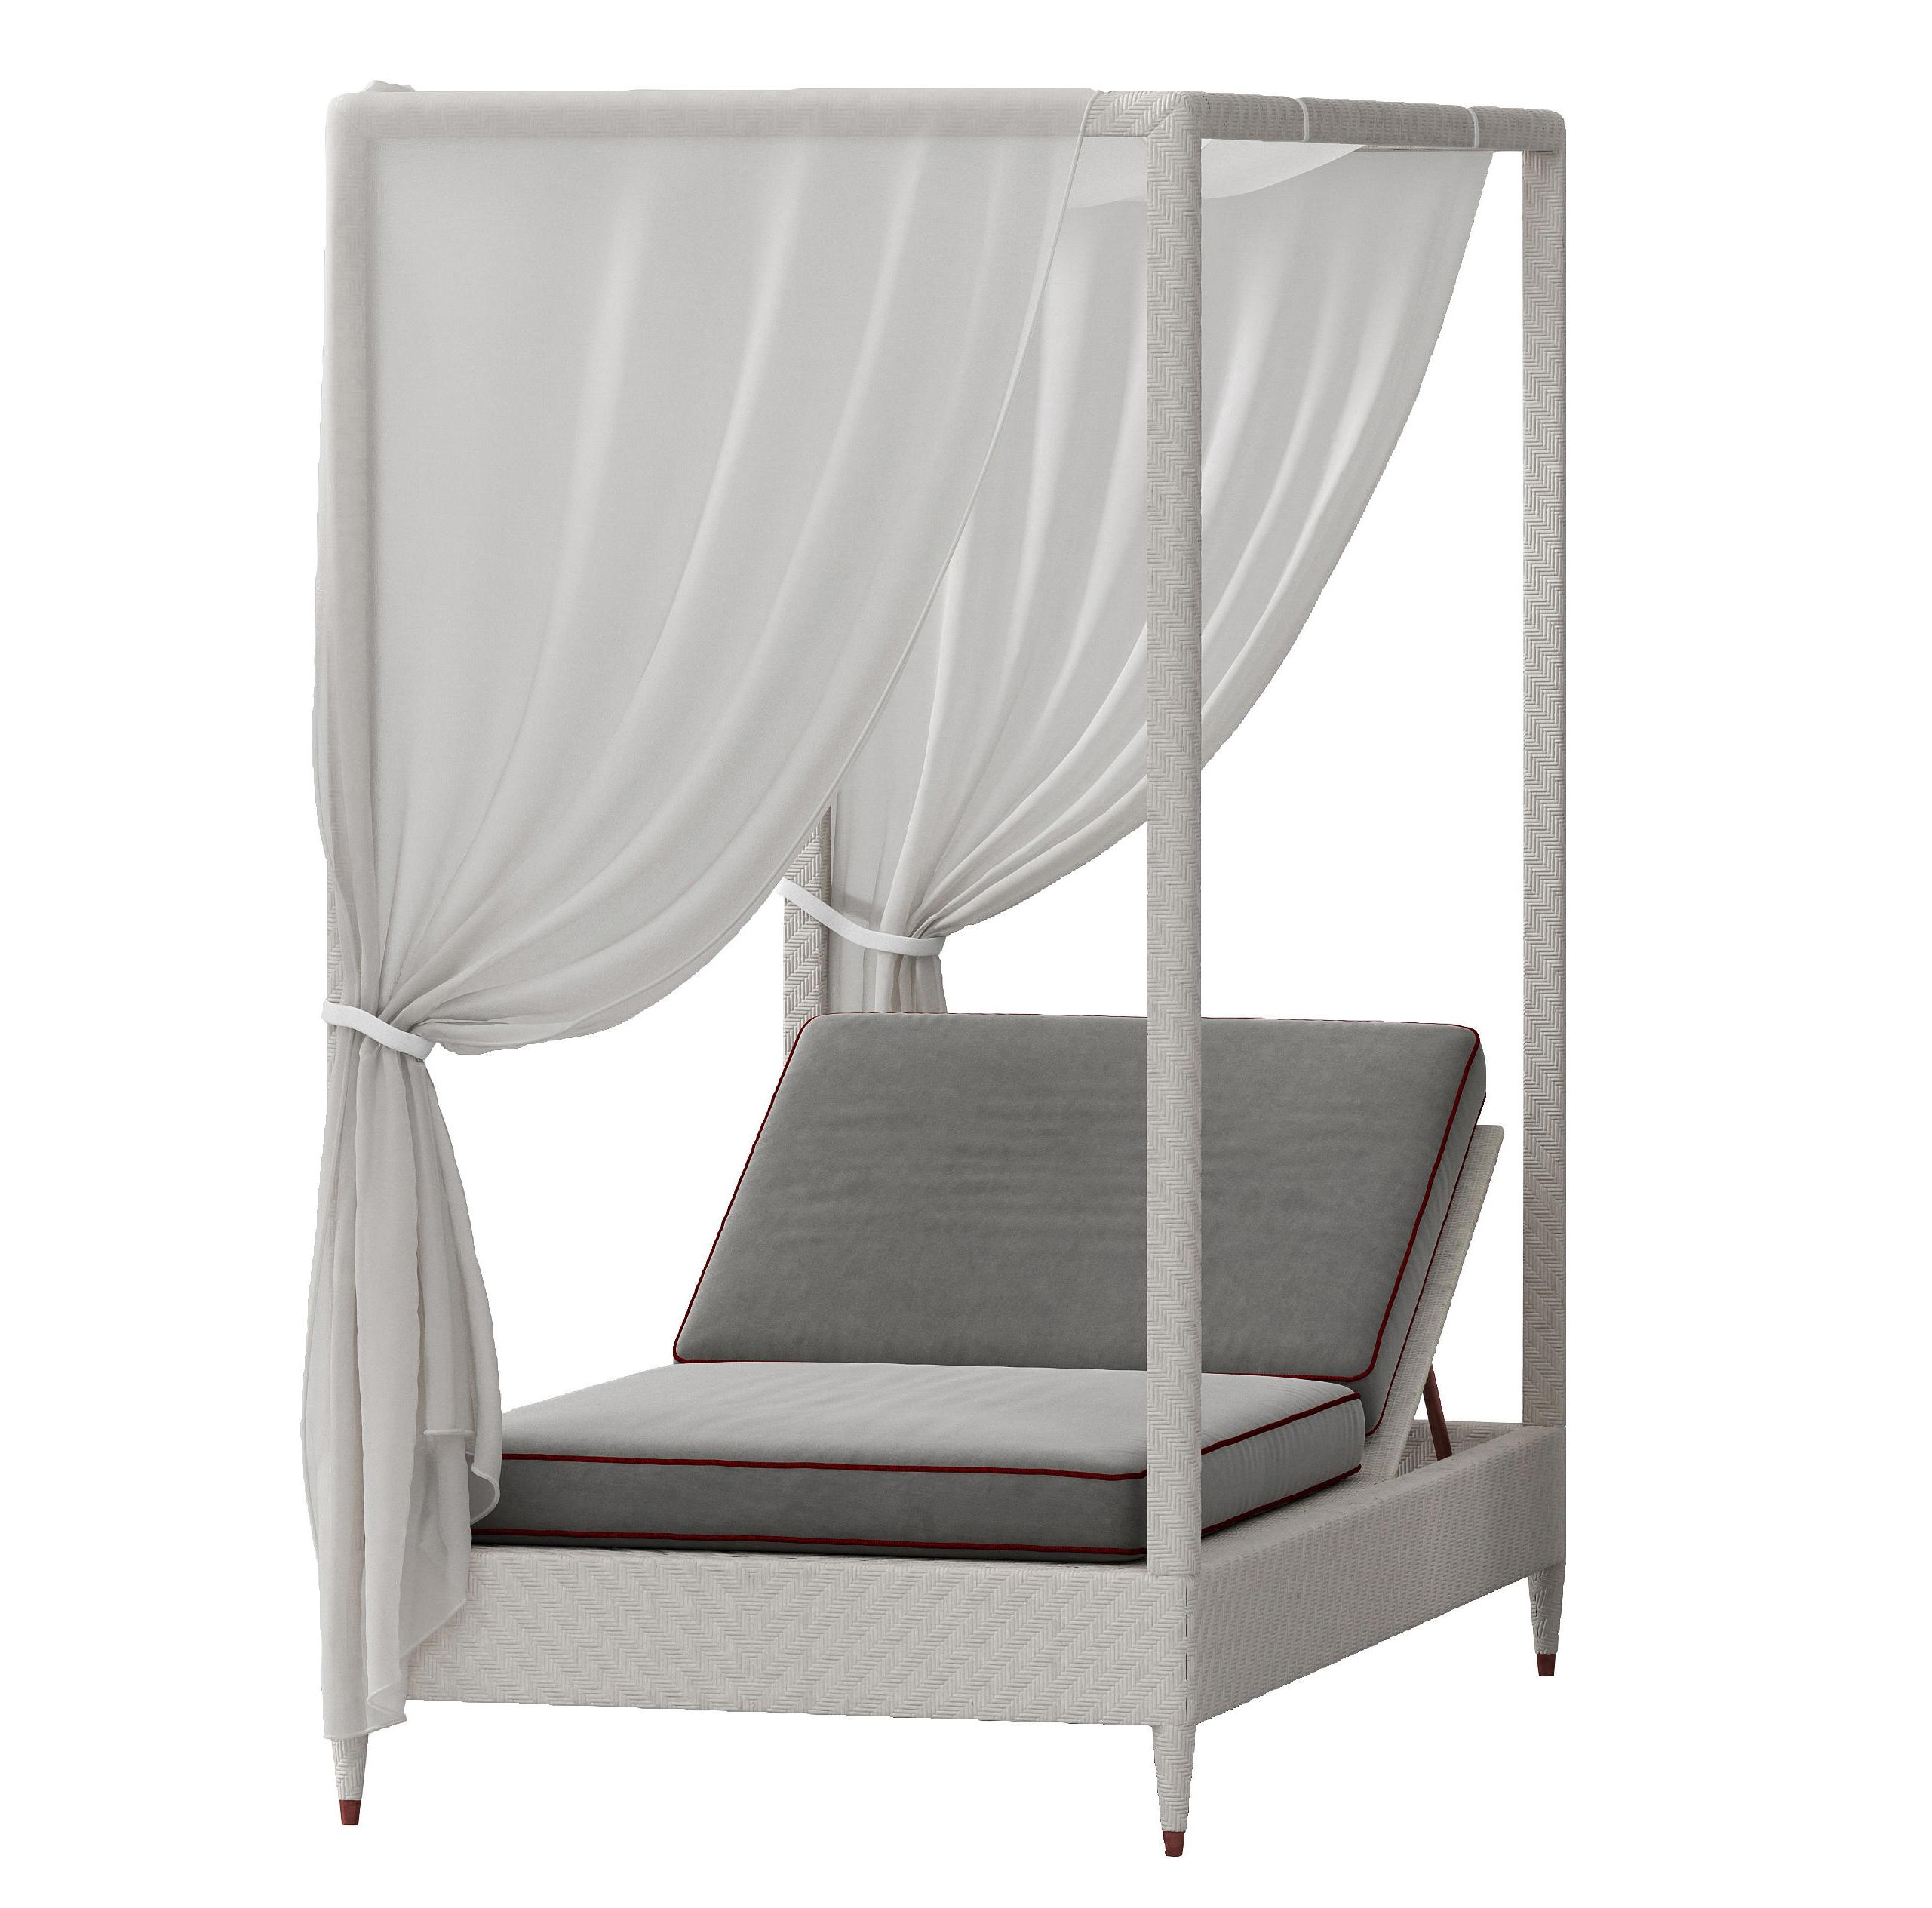 One-Seater Daybed with Canopy